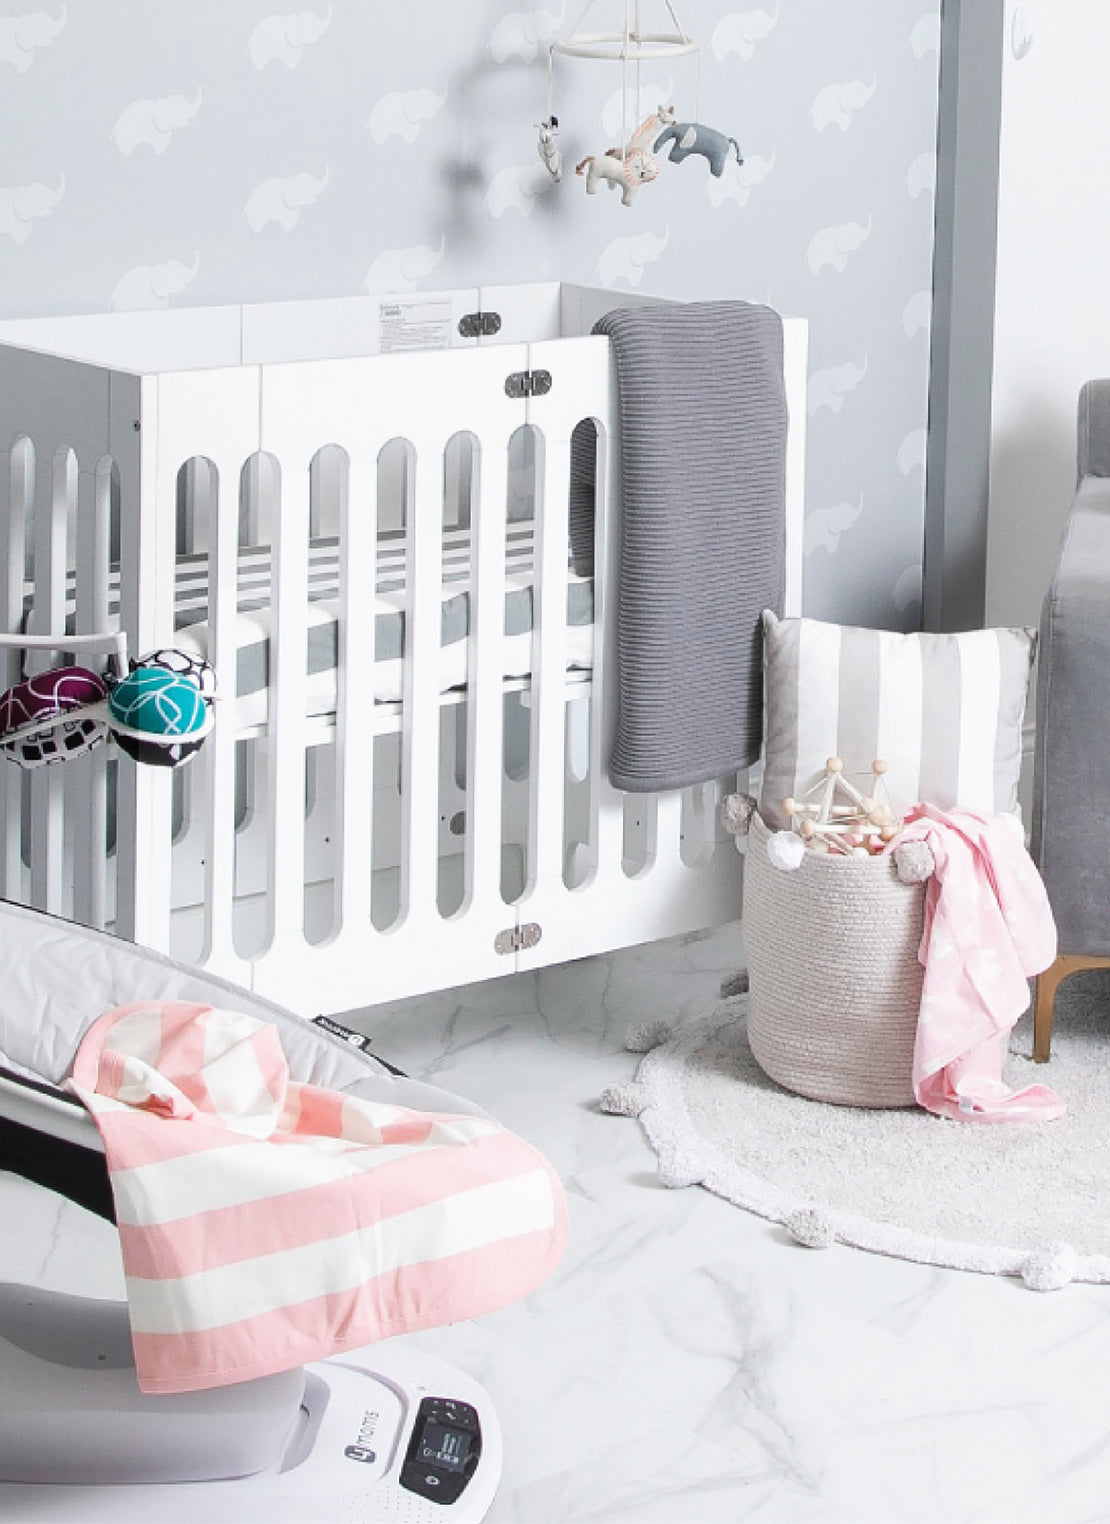 Nursery with crib, blanket, and accessories.